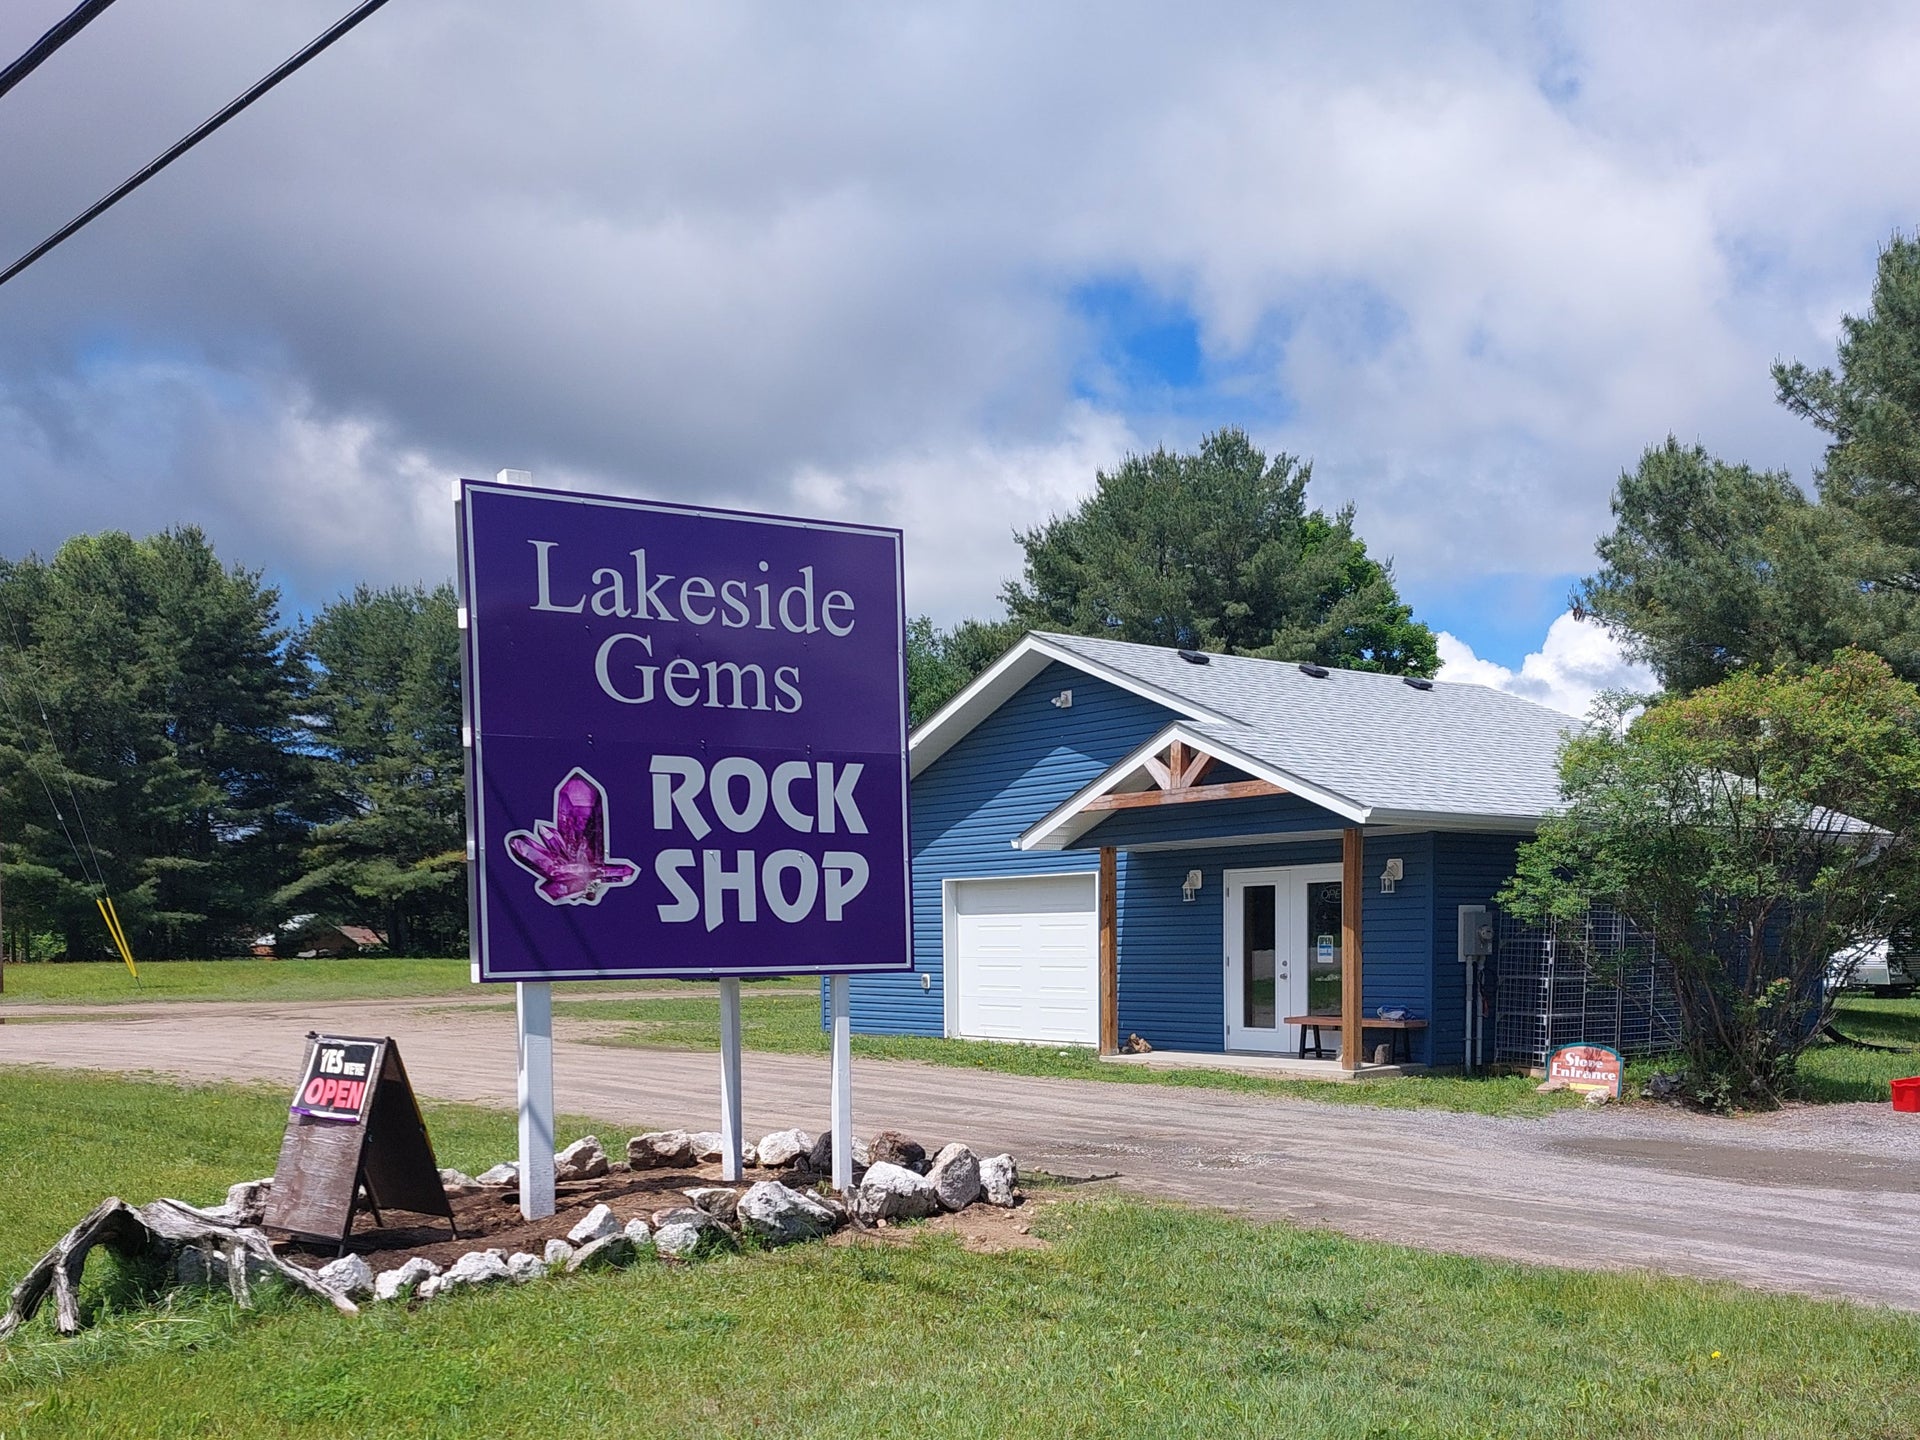 Lakesides Gem's store from outside